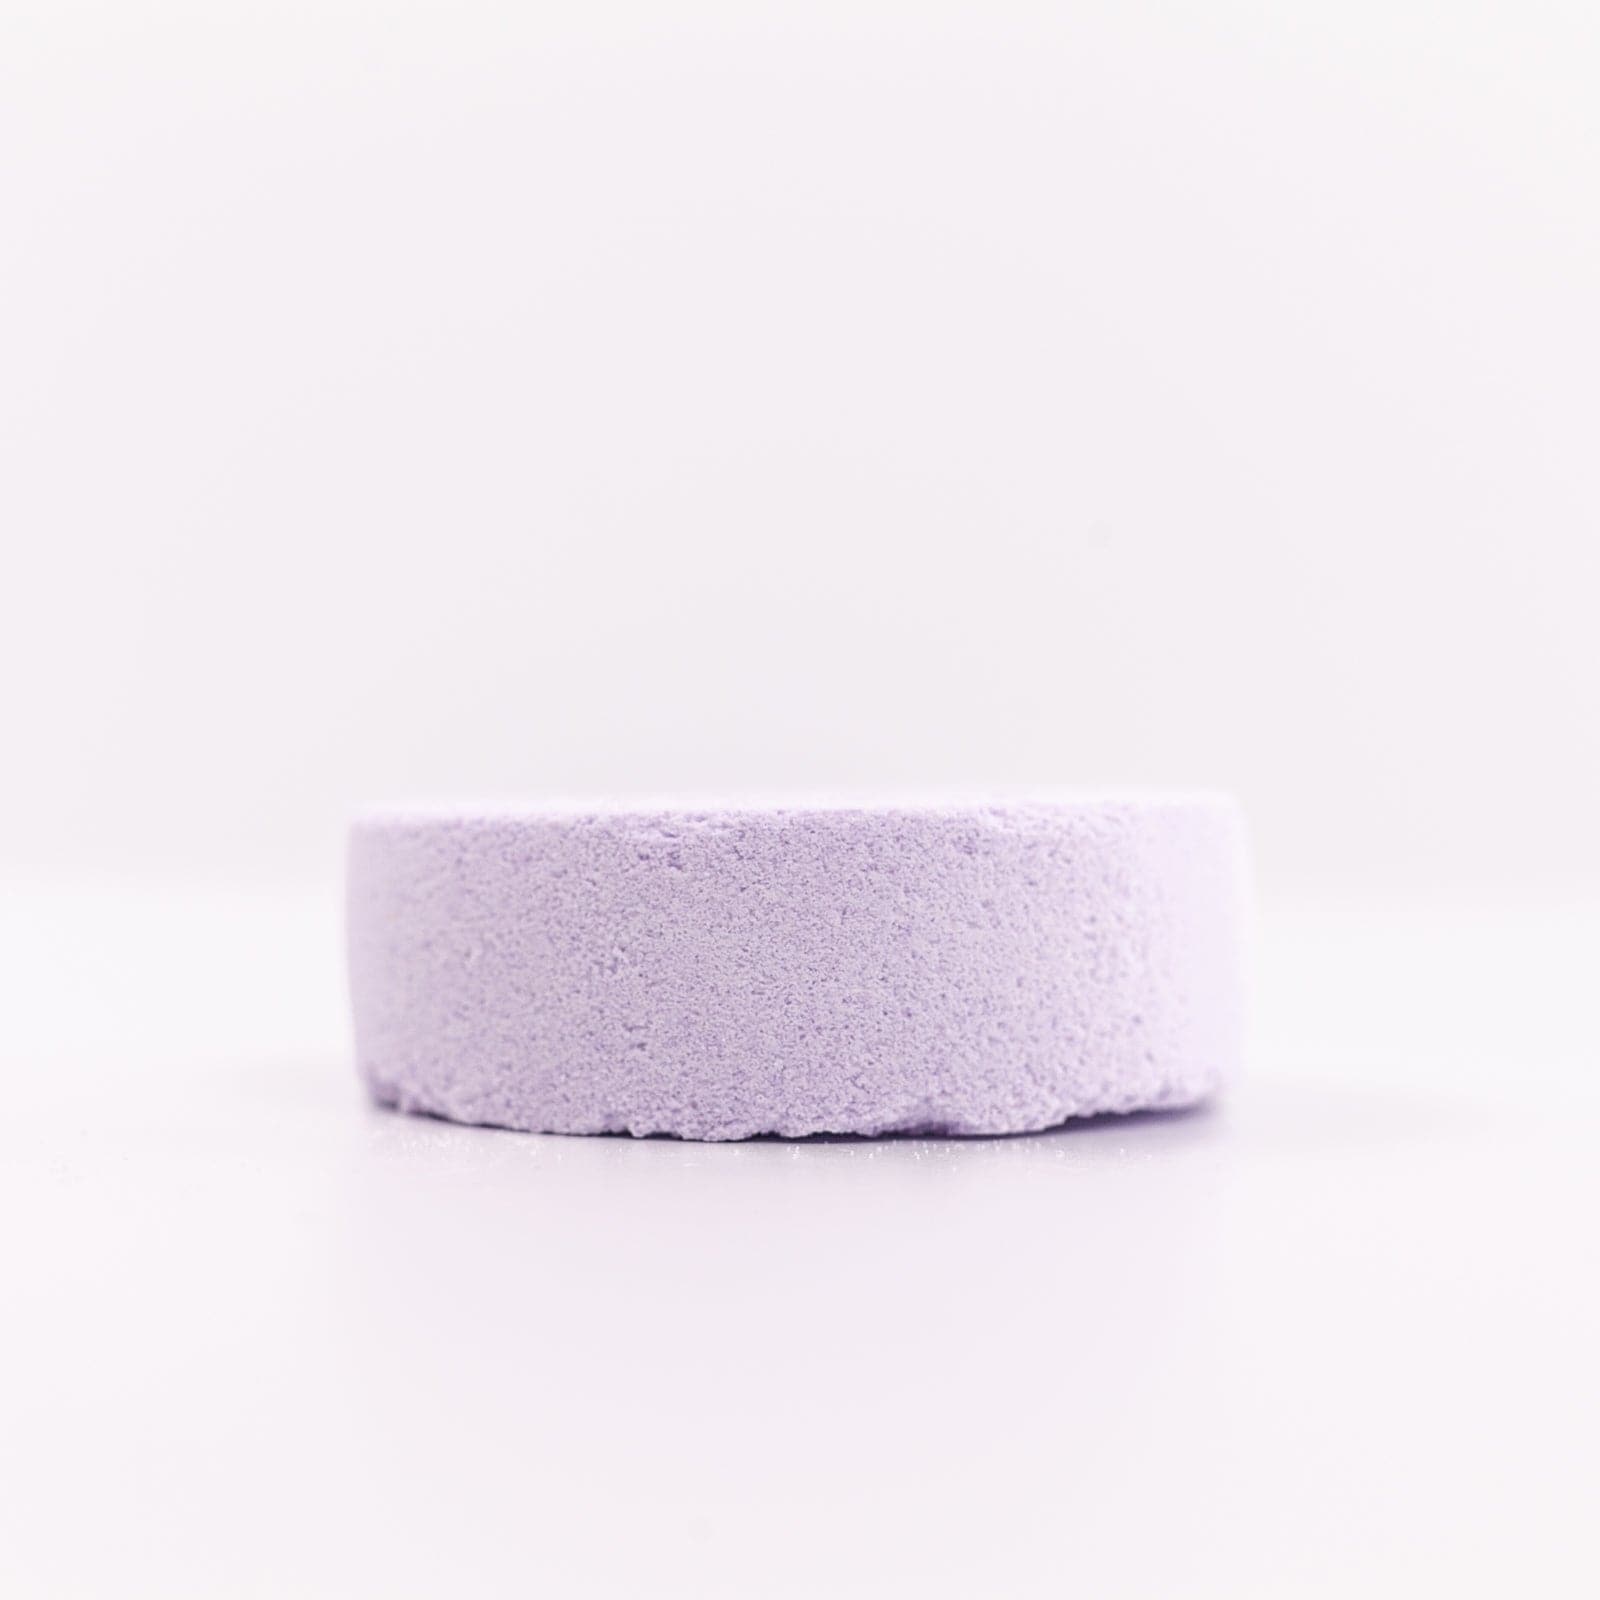 Buff City Soap's lavender colored and scented shower fizzy soap faced down